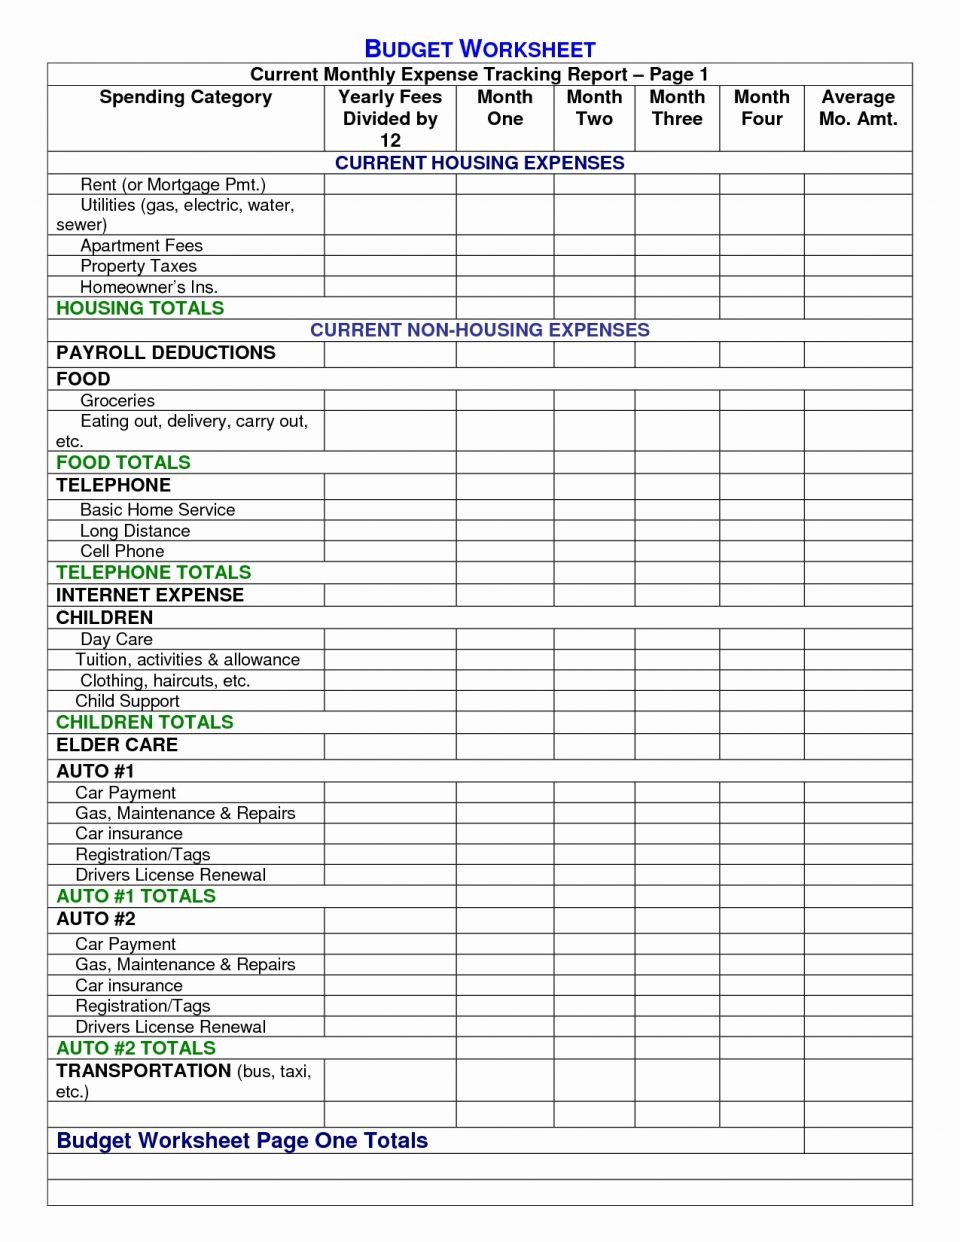 Monthly Expenditure Excel Sheet Best Of Design Spreadsheet Salon Document Expenses